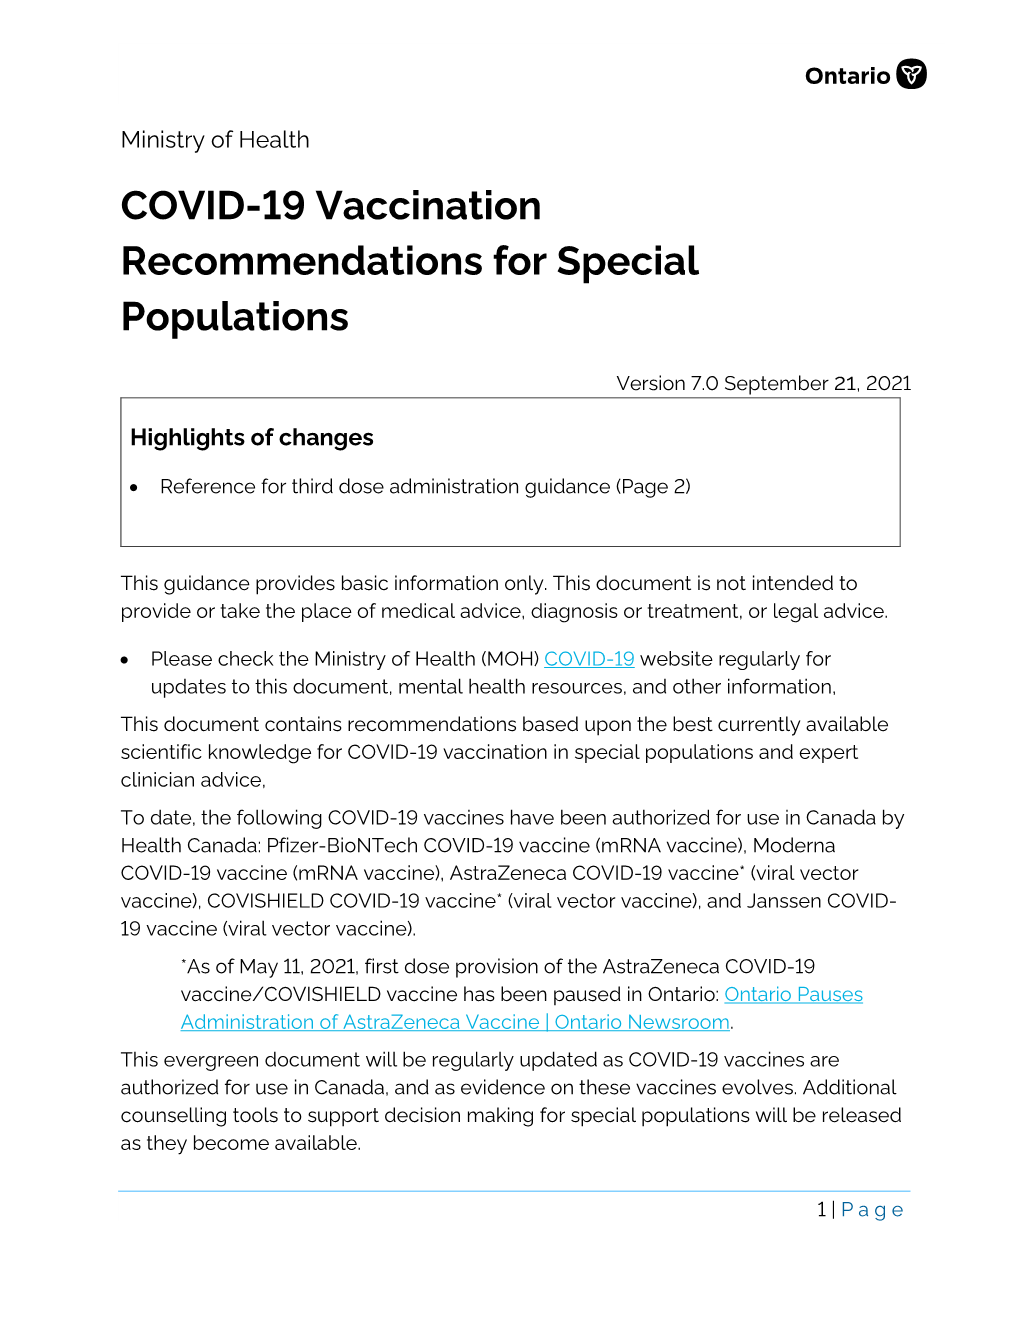 COVID-19 Vaccine Recommendations Special Population